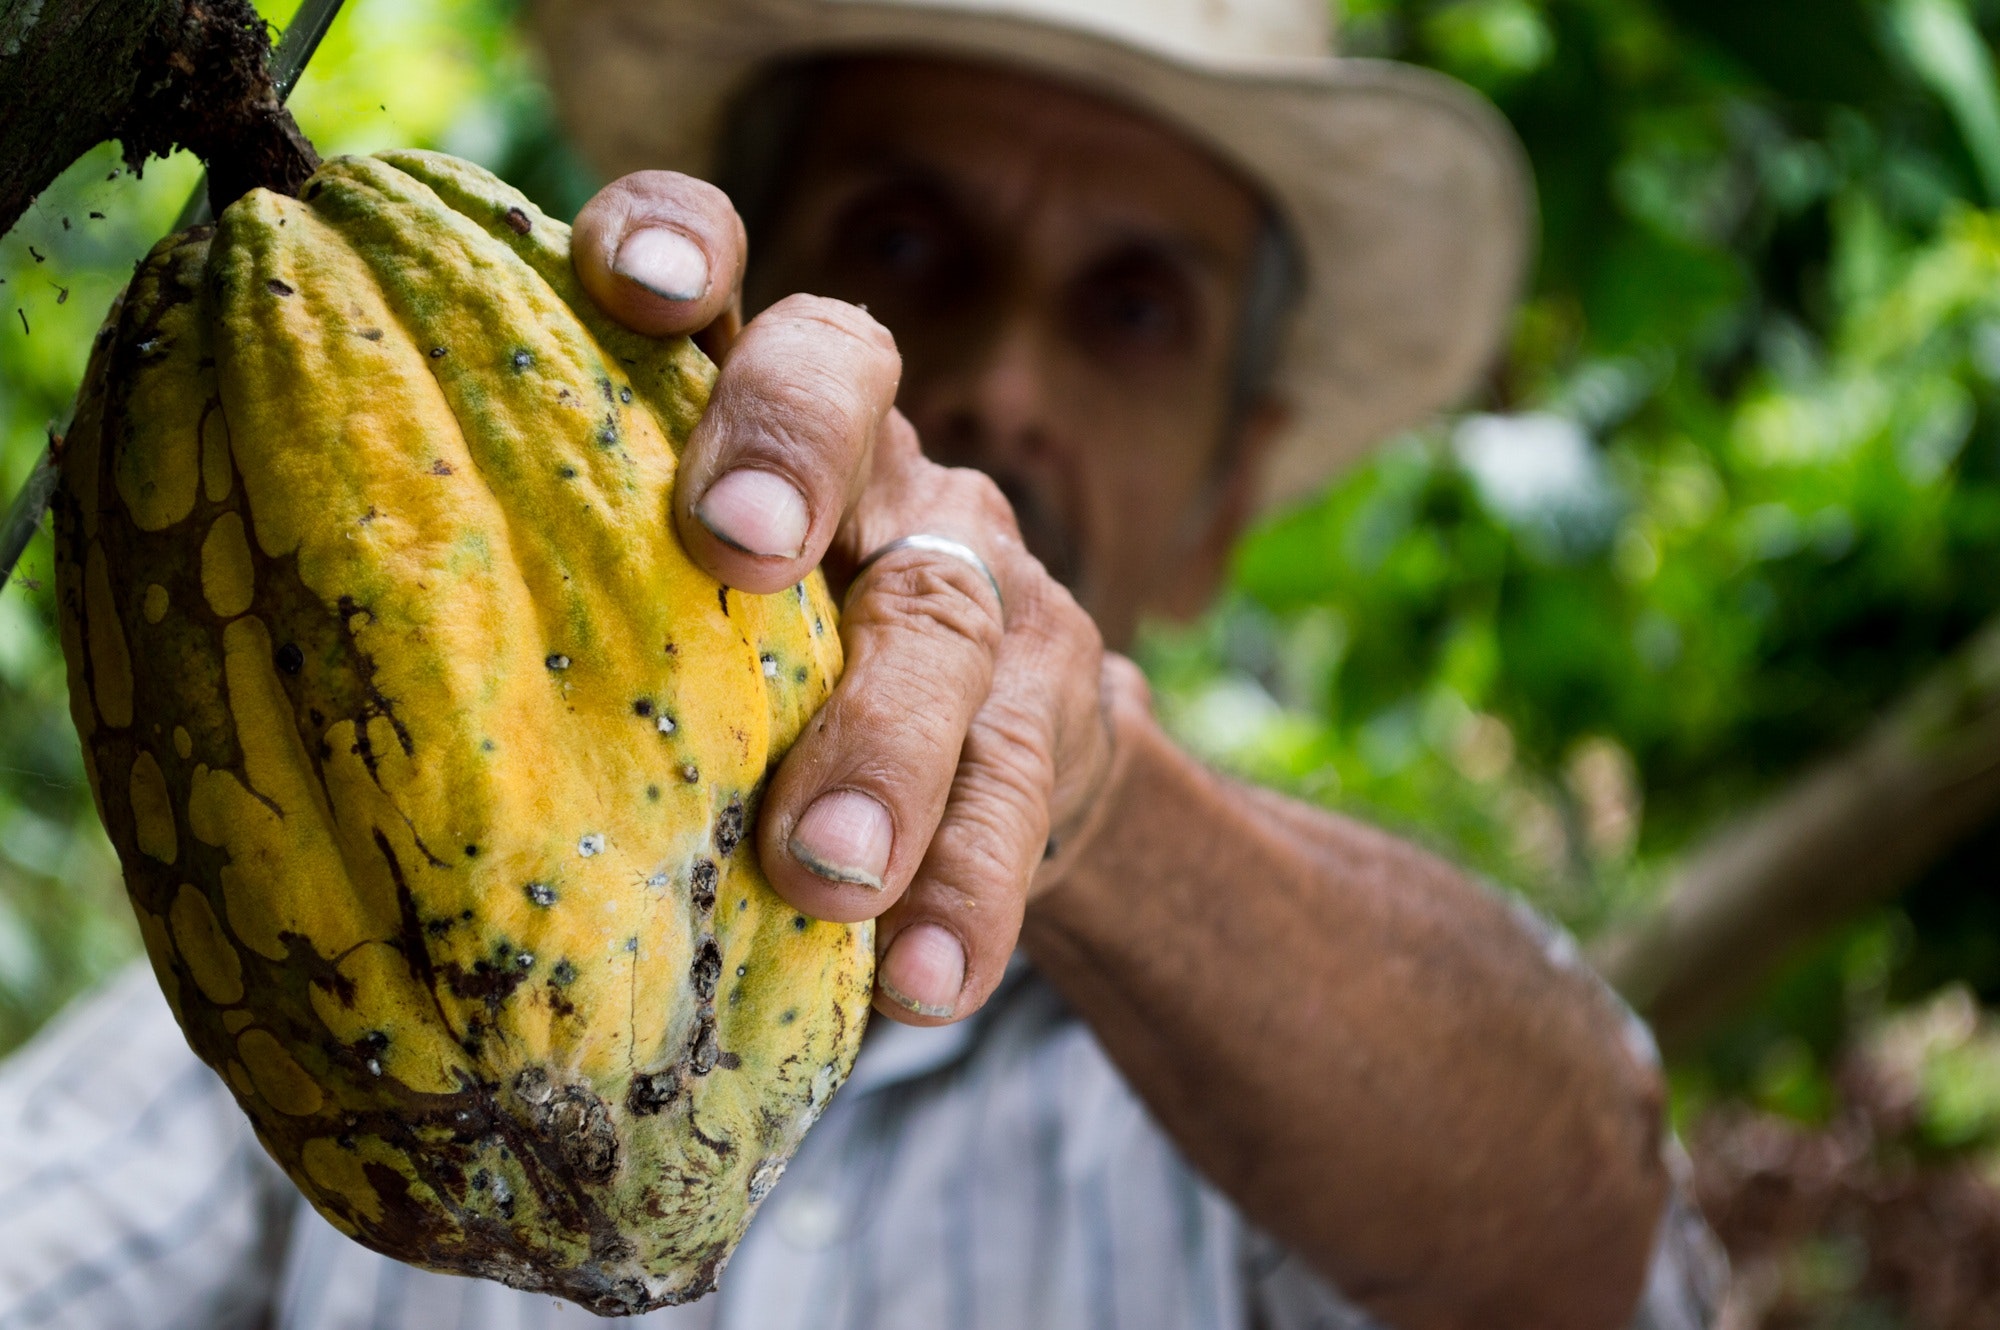 Deforestation-Free Cocoa: Corporate Commitments and Smallholder Challenges